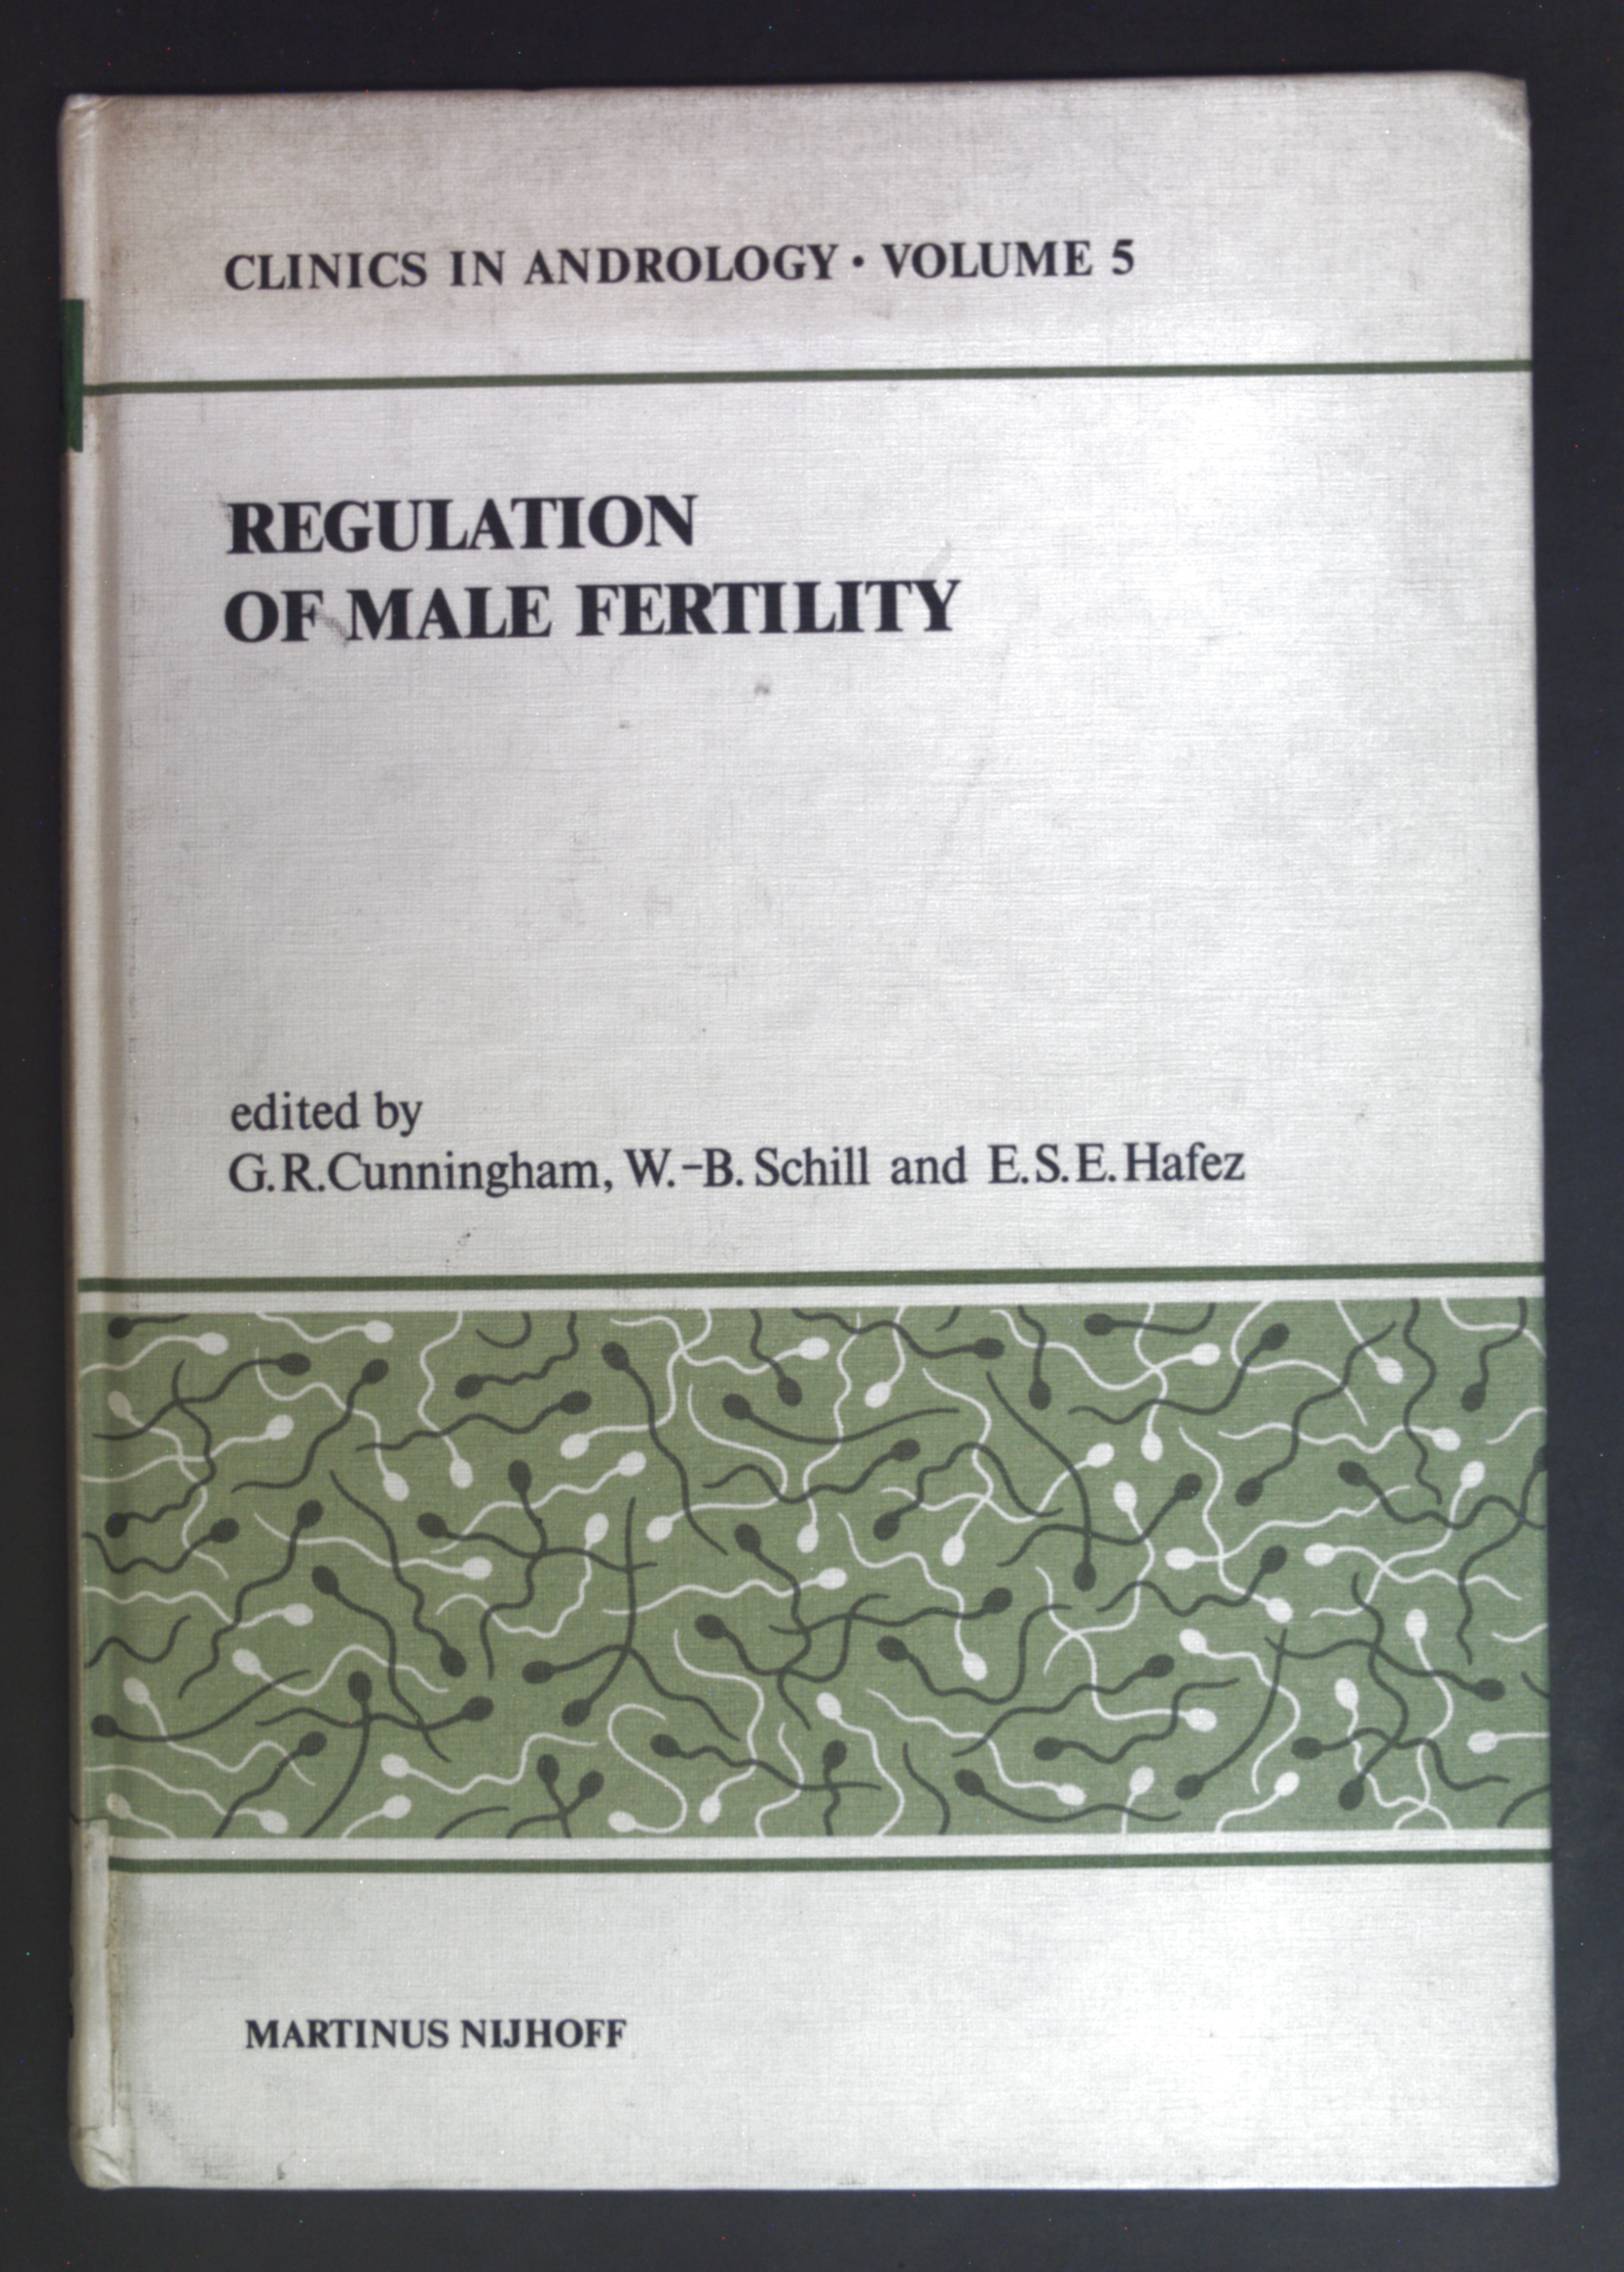 Regulation of Male Fertility: 1st Pan American Congress of Andrology, Selected Papers. Clinics in Andrology, Band 5. - Cunningham, G.R., E.S. Hafez and W.B. Schill